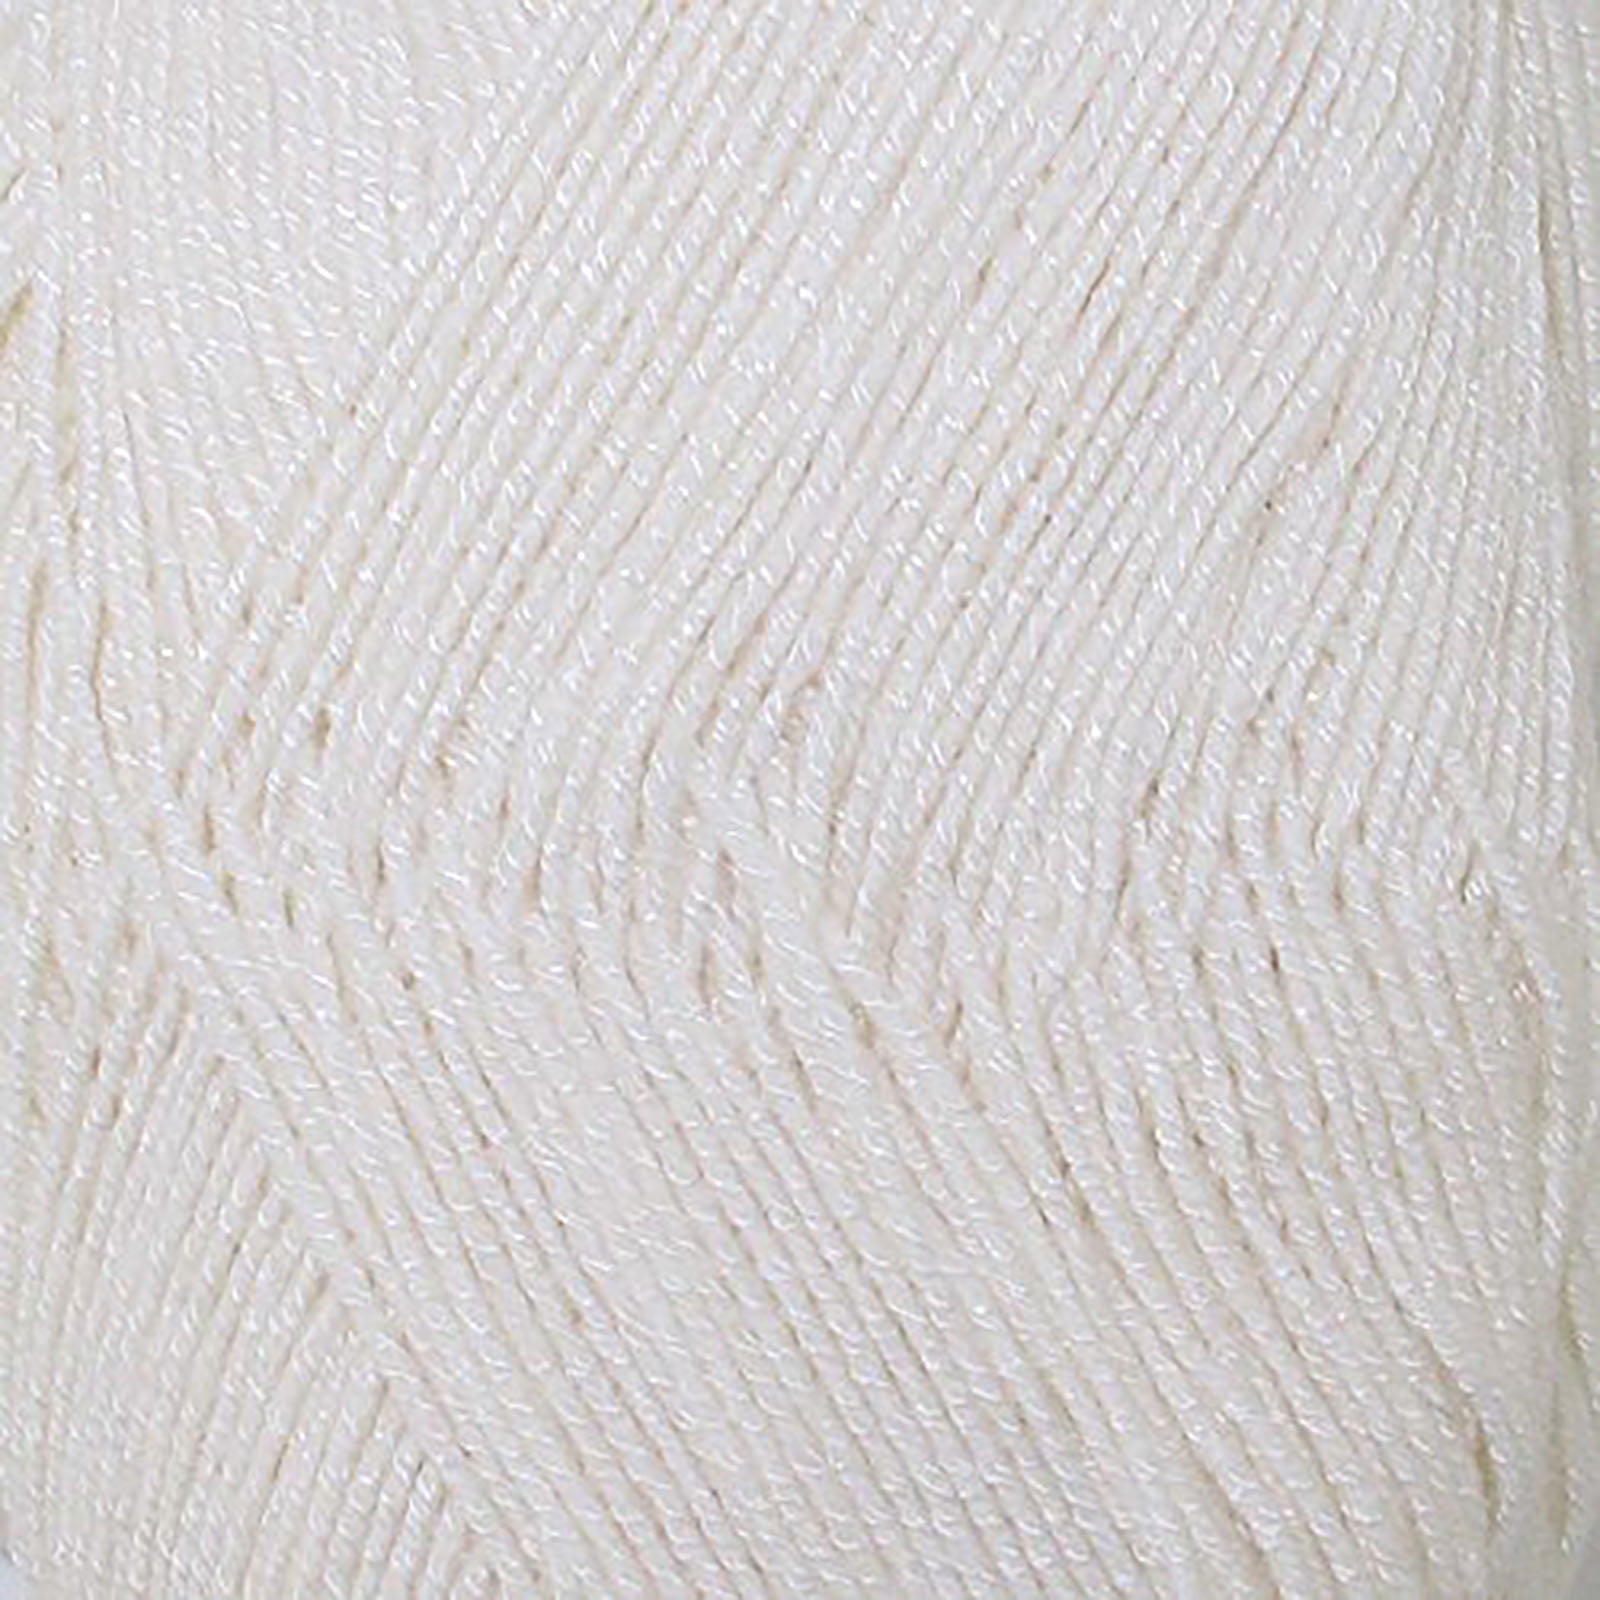 Super Fine Weight Soft and Slim Yarn Color 9916 Pin Stripe Grey - BambooMN - 2 Skeins, Gray